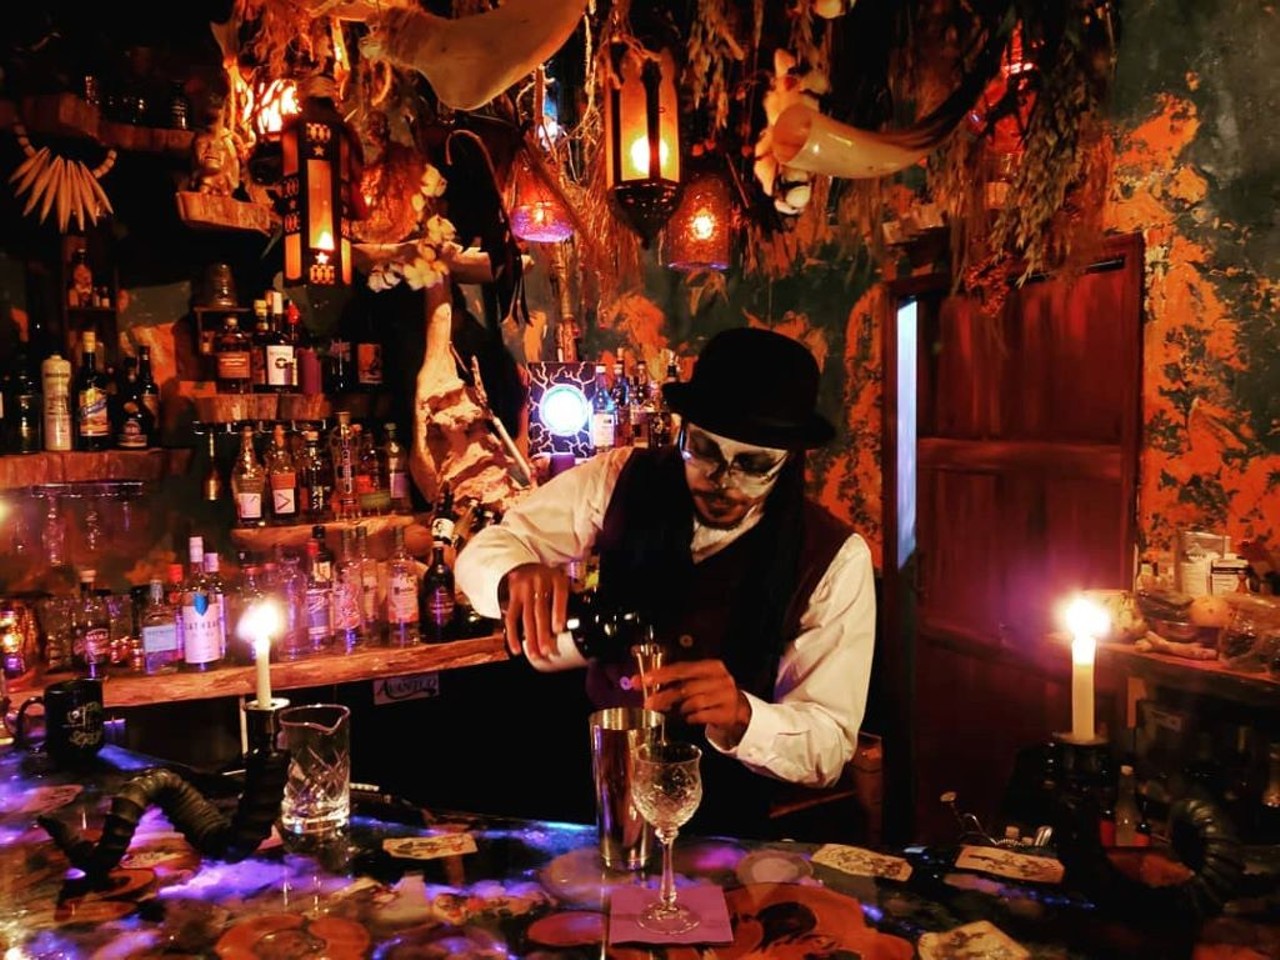 Cocktails & Screams
39 W. Pine St., Orlando
If you like your craft beverages with a generous dose of horror and dark camp, then this downtown spot is for you. Also features themed nights, drag shows and a secret speakeasy, The Craft witch bar, in the back (oops).